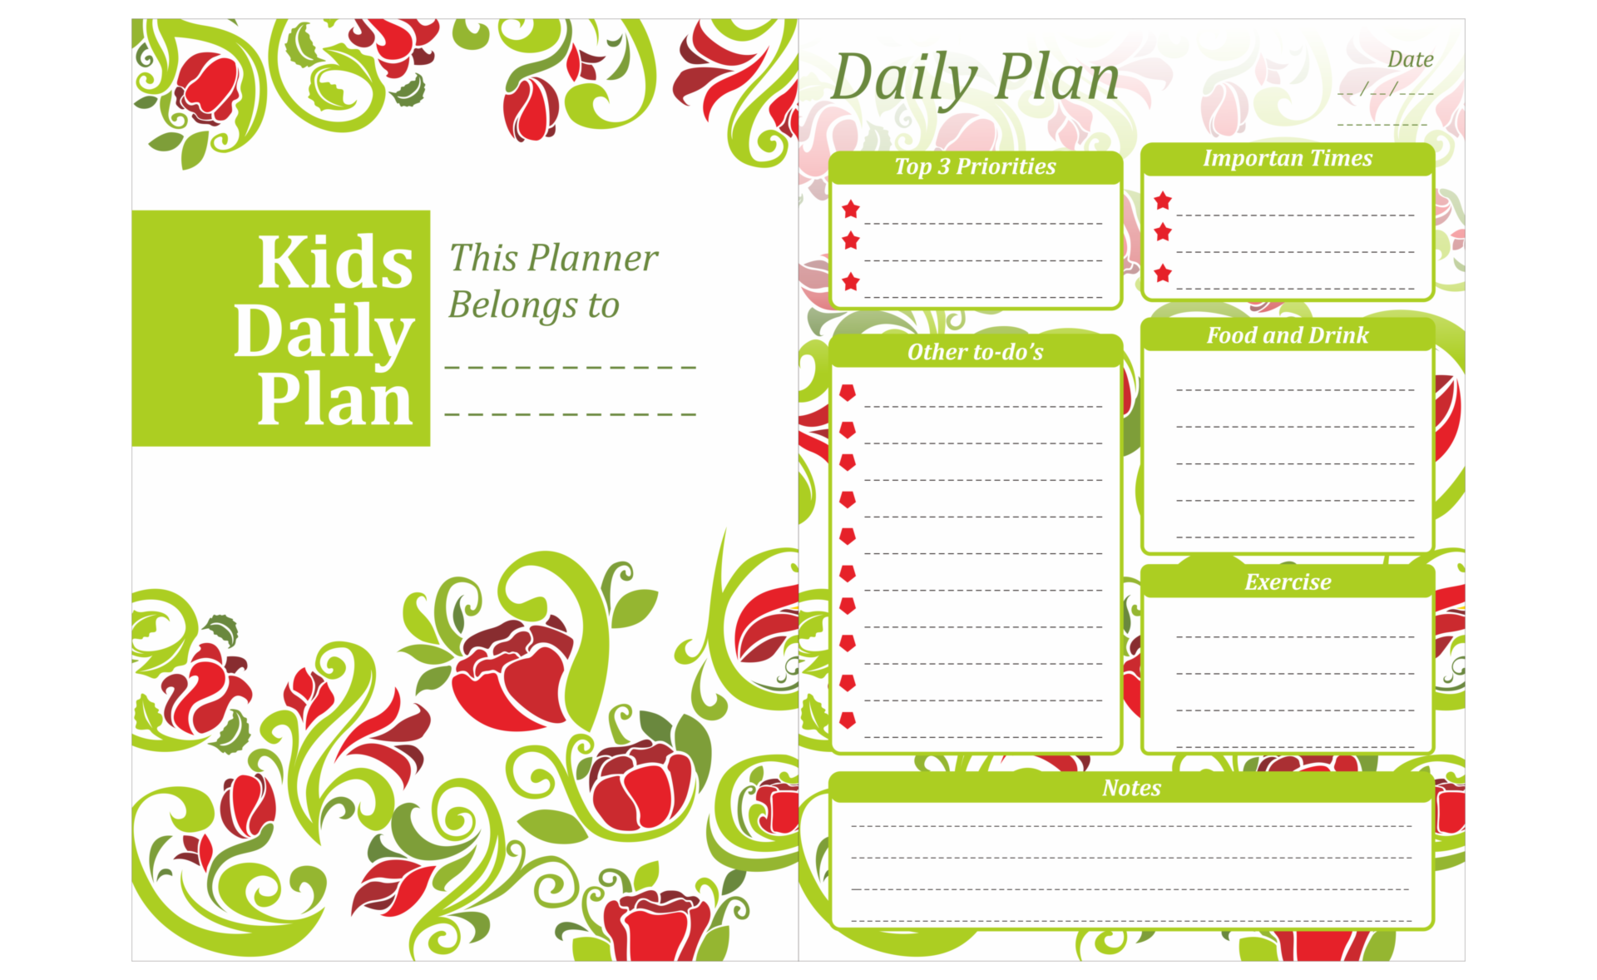 Kids Daily Plan Design with red rose flower ornament theme png